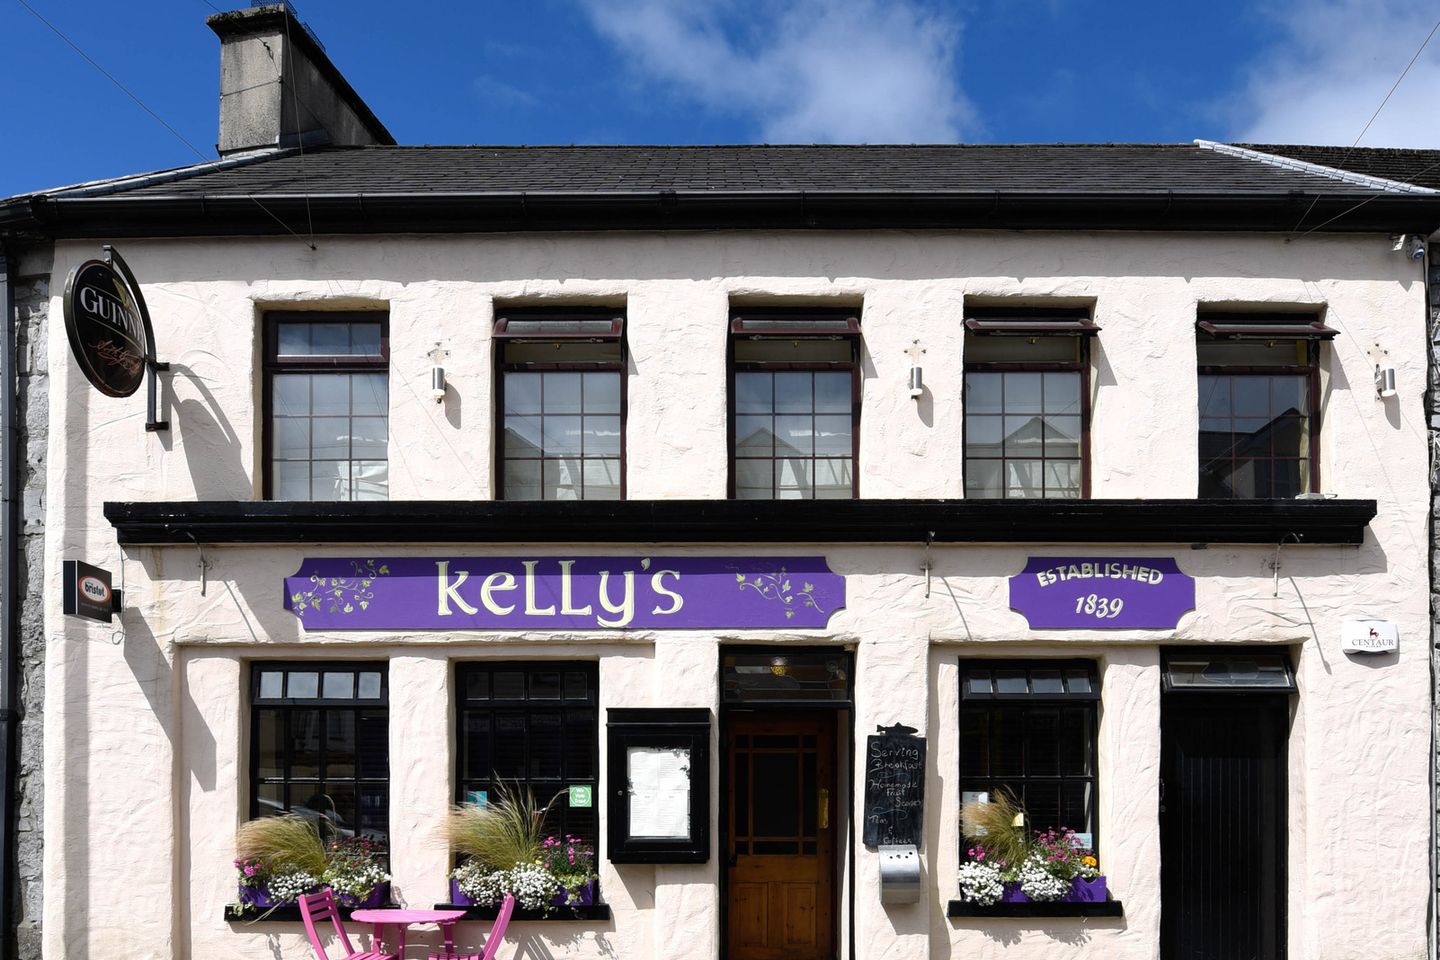 Kelly's Residential Licensed Premises, Oughterard, Co. Galway